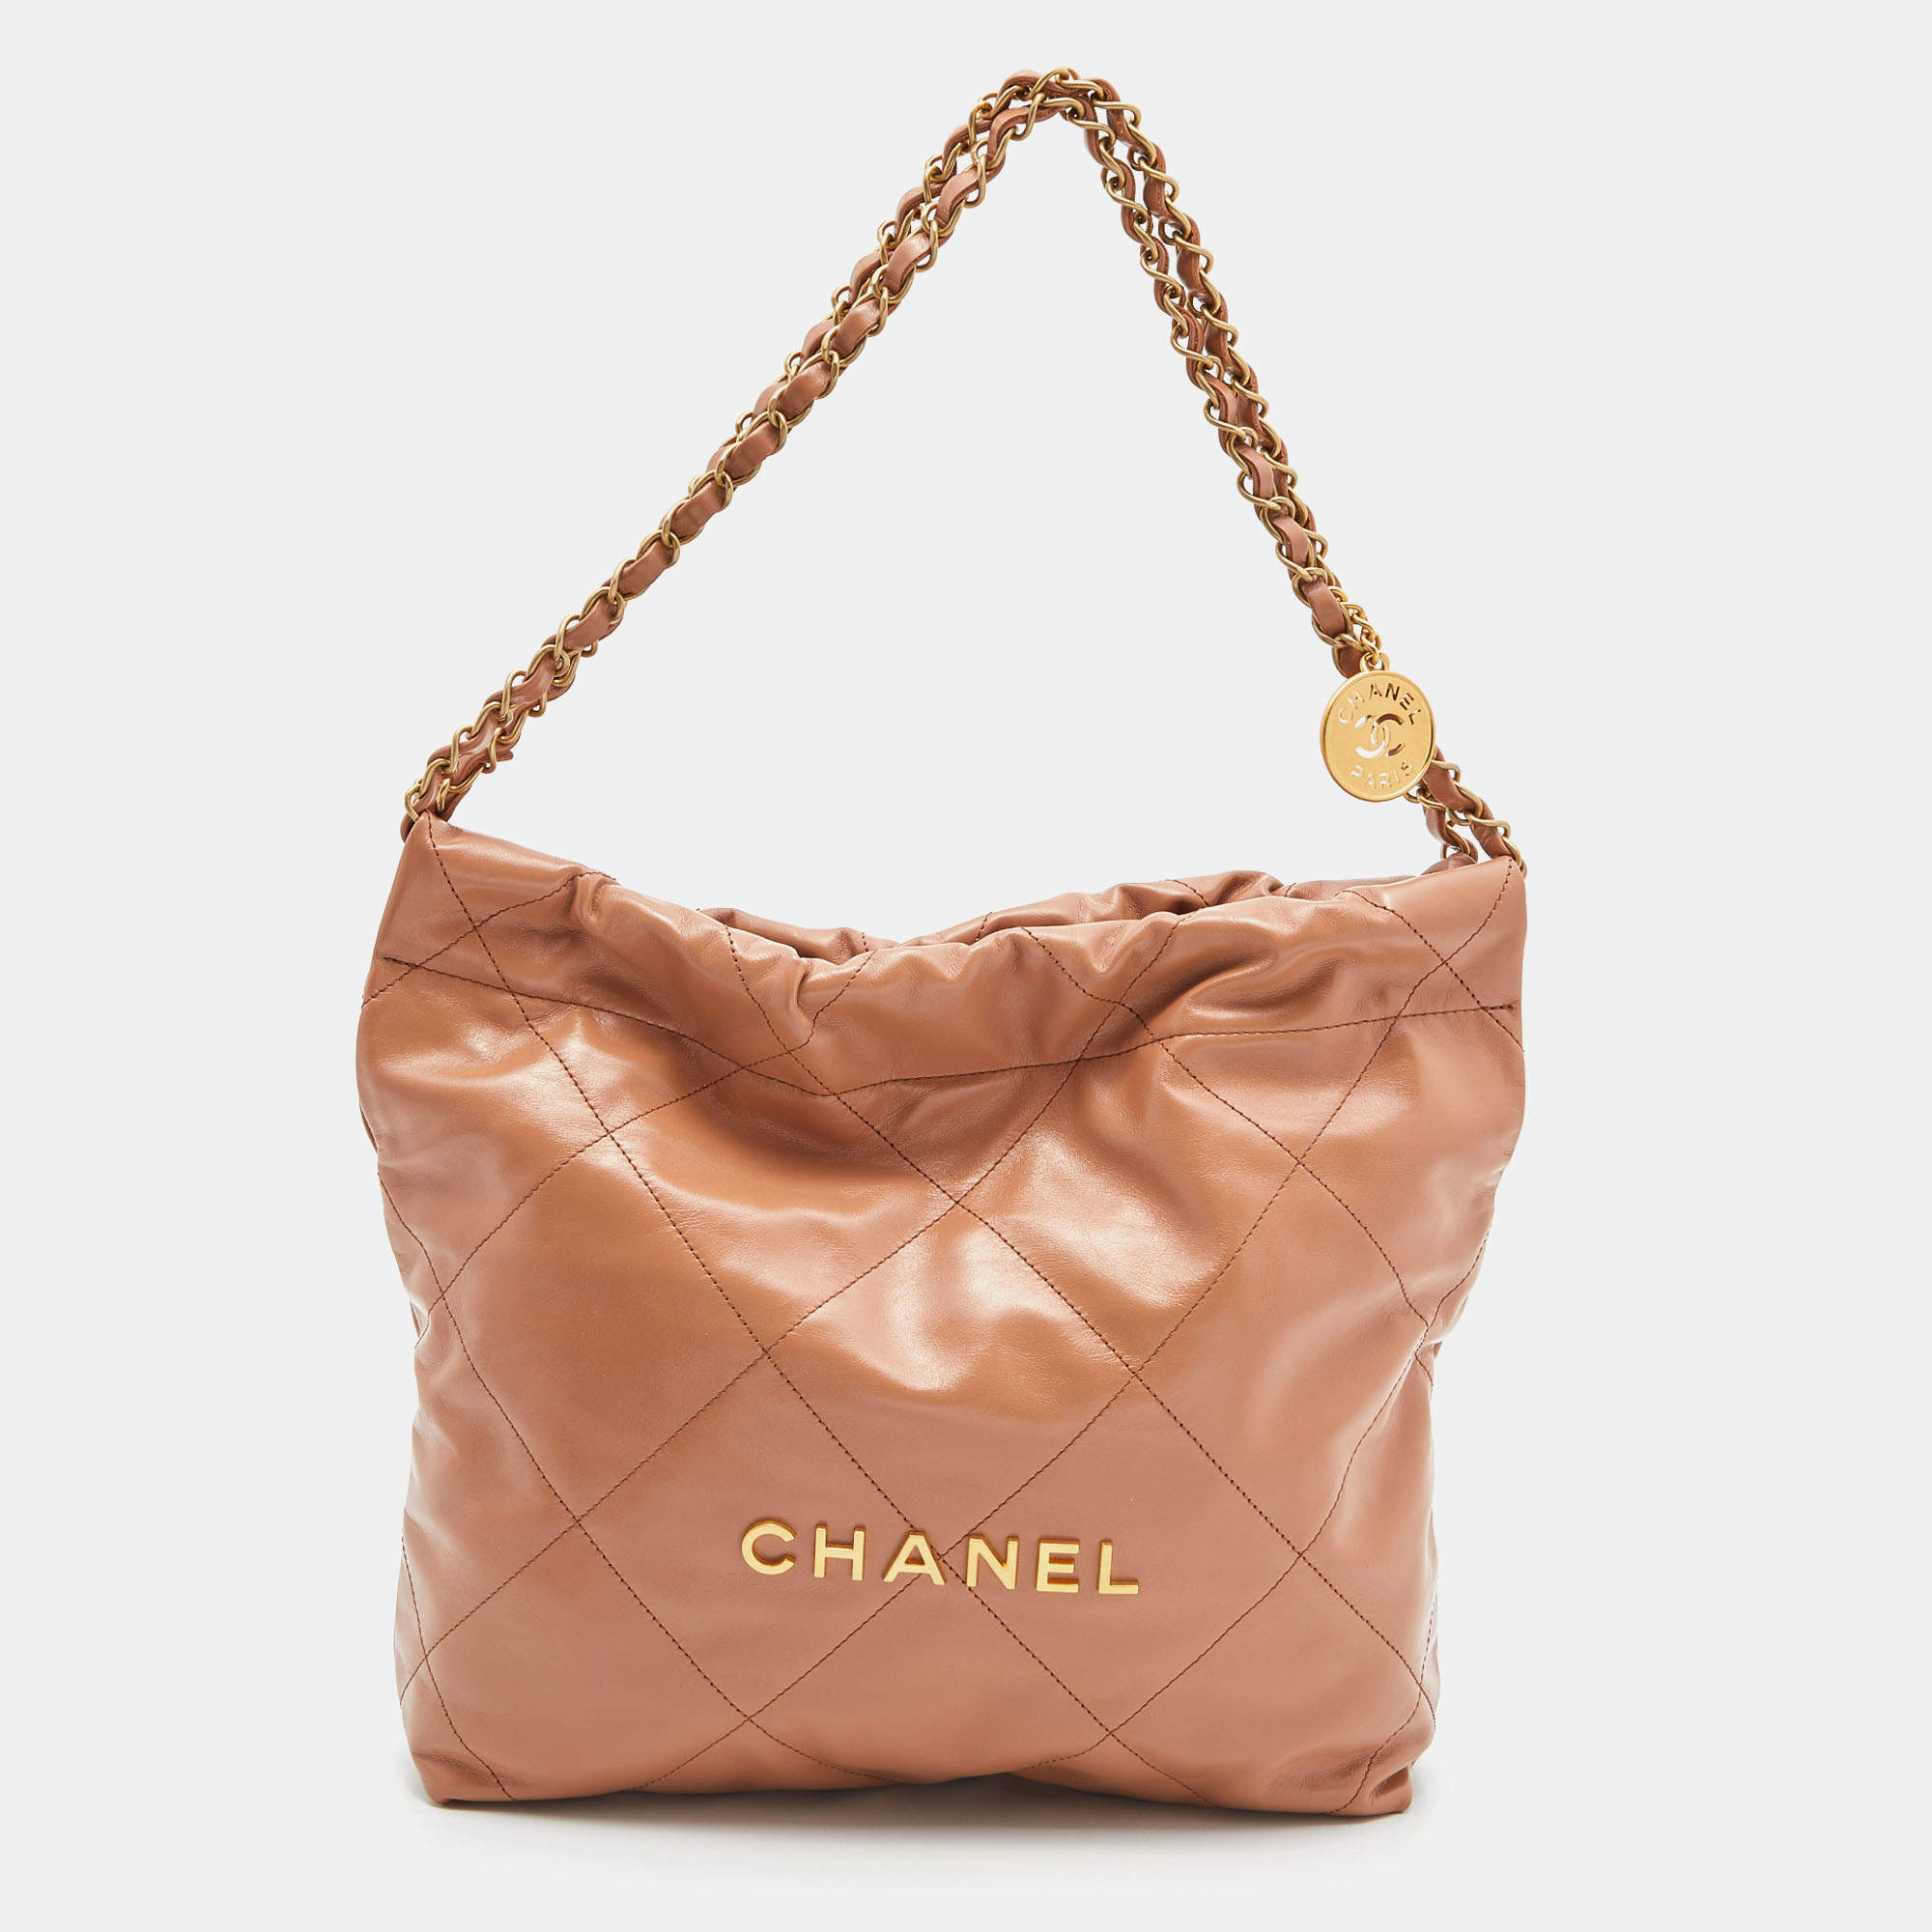 Chanel Tan Quilted Leather East West Flap Bag at 1stDibs  chanel tan flap  bag tan chanel bag chanel tan bag